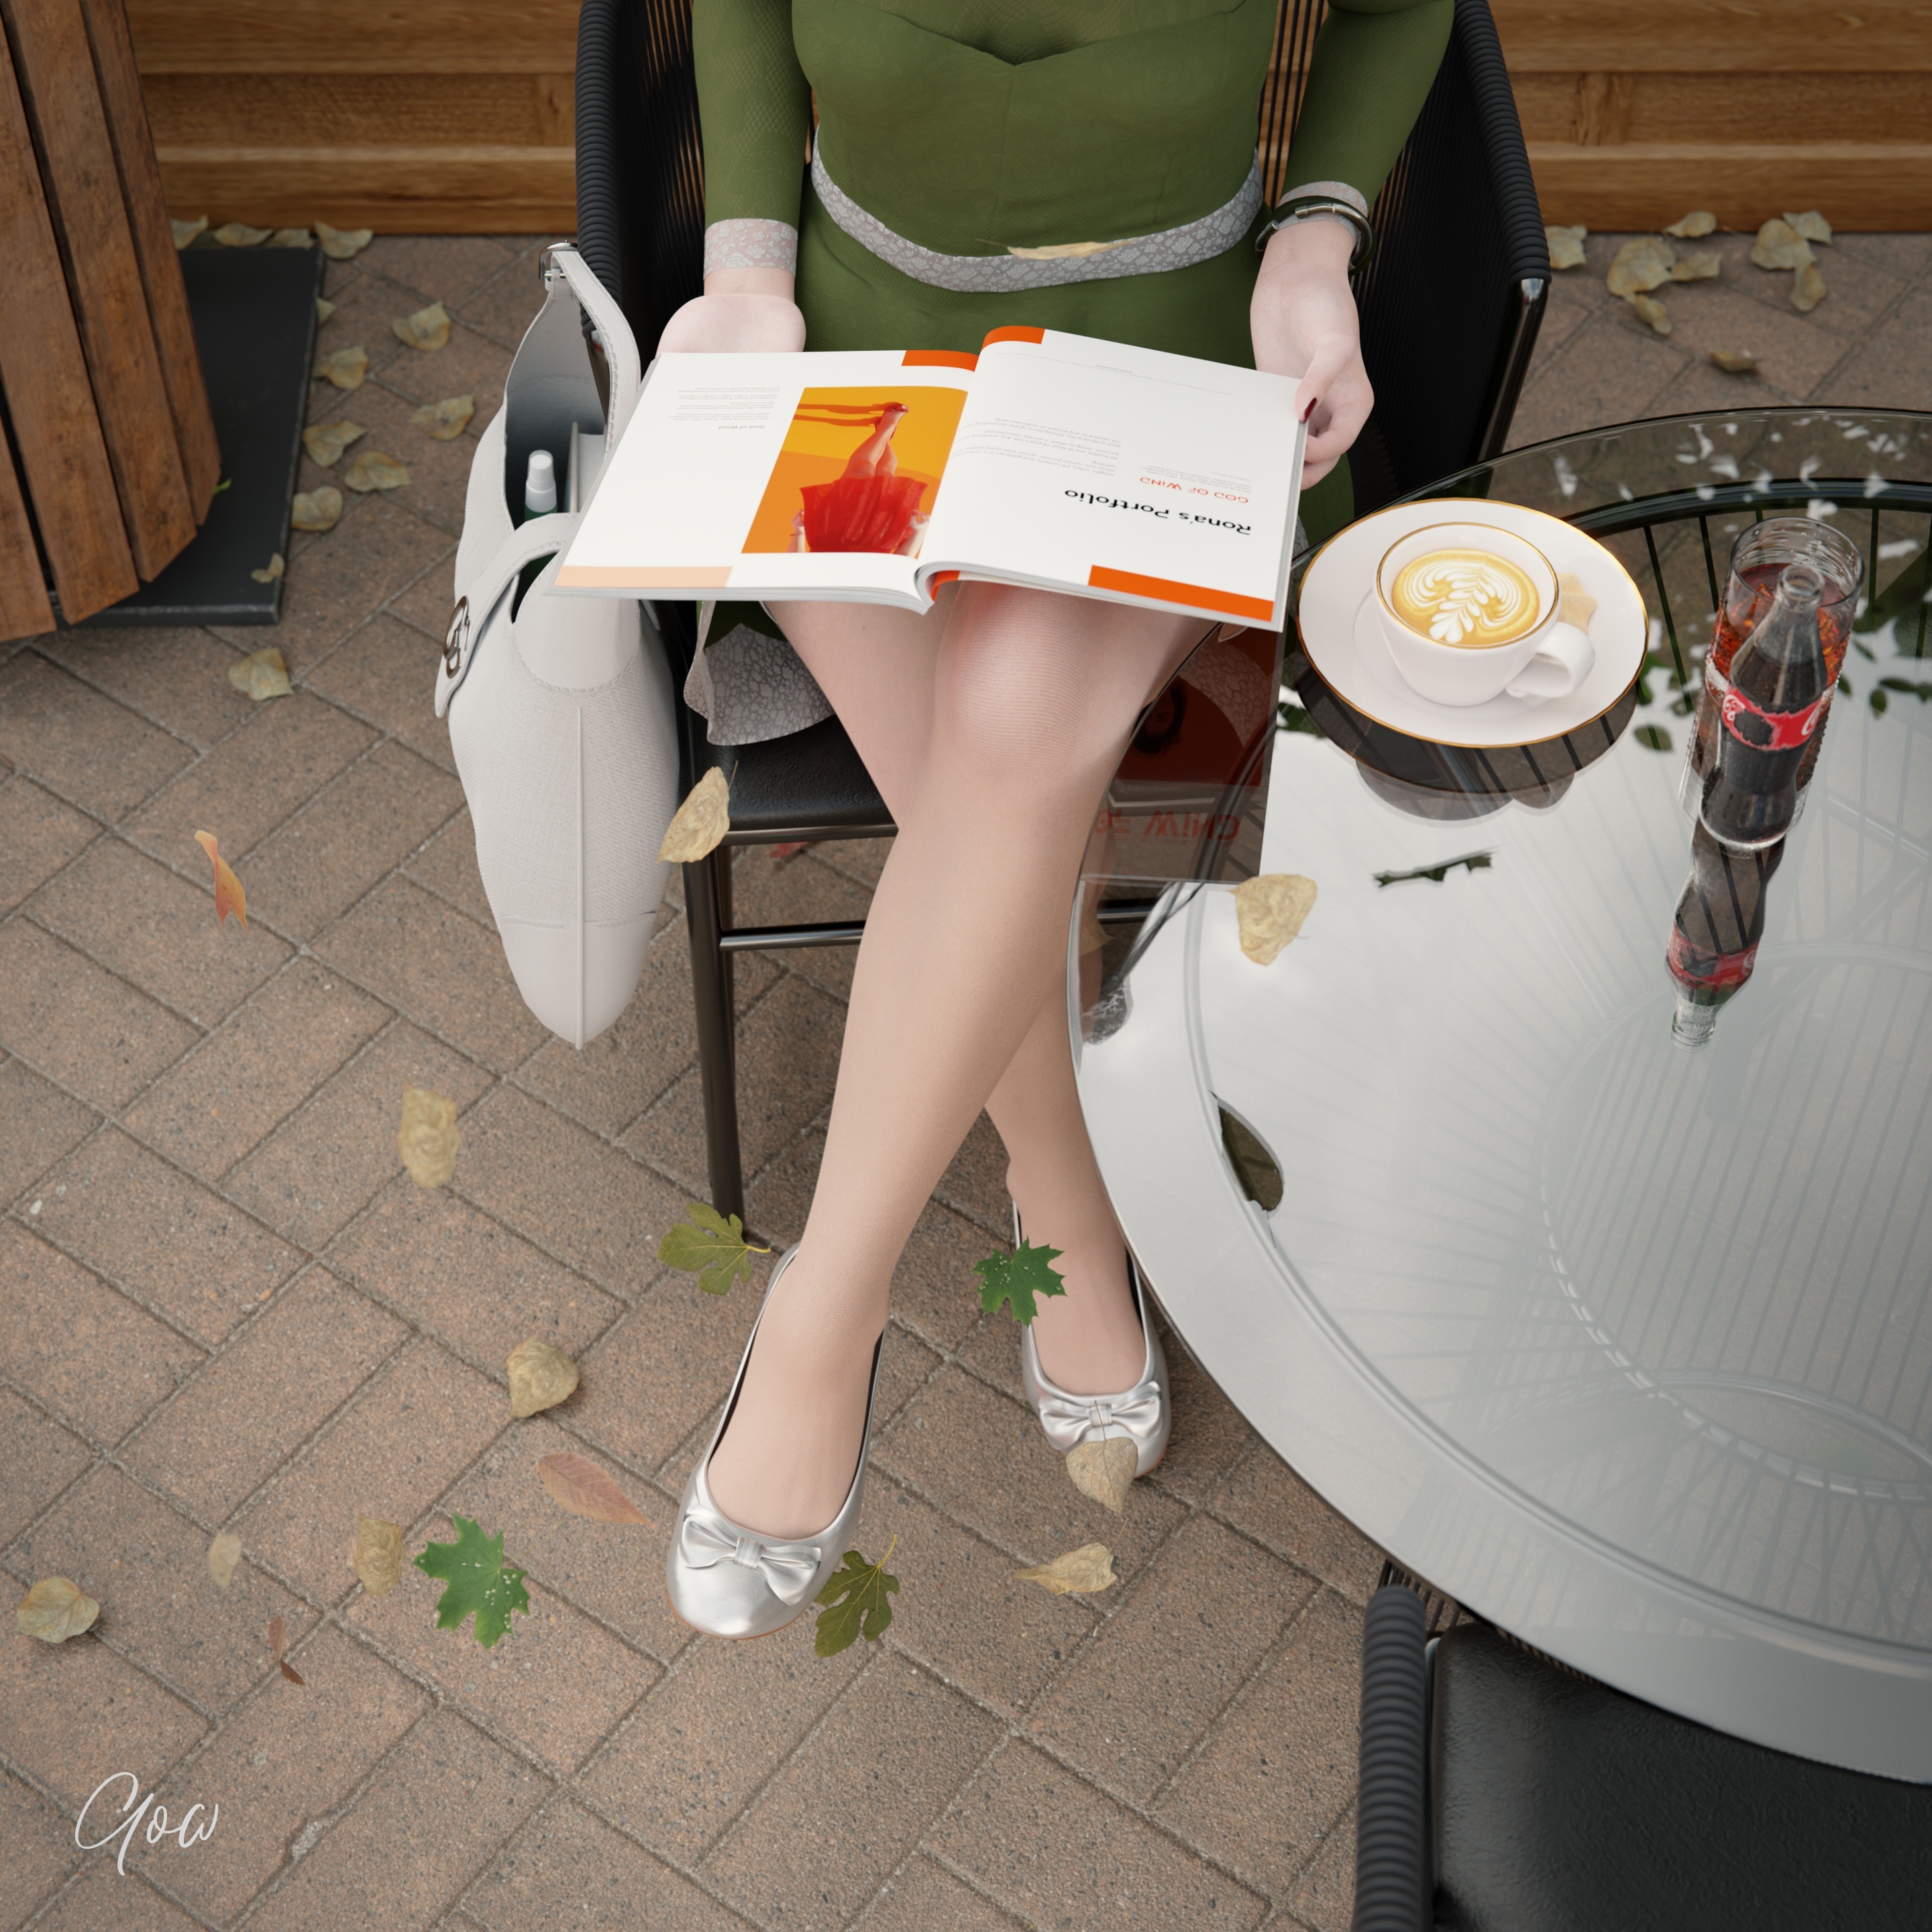 Rona in Greencaffe pt2 (Windy days) White Ballerina Cosplay Nylon Milf Clothed Upskirt Wet Pussy Story Legs Spread Legs Tease Photorealistic No Panties Dress Partially_clothed Outdoor Party Dress Lifted_skirt Skirt Original Character 6